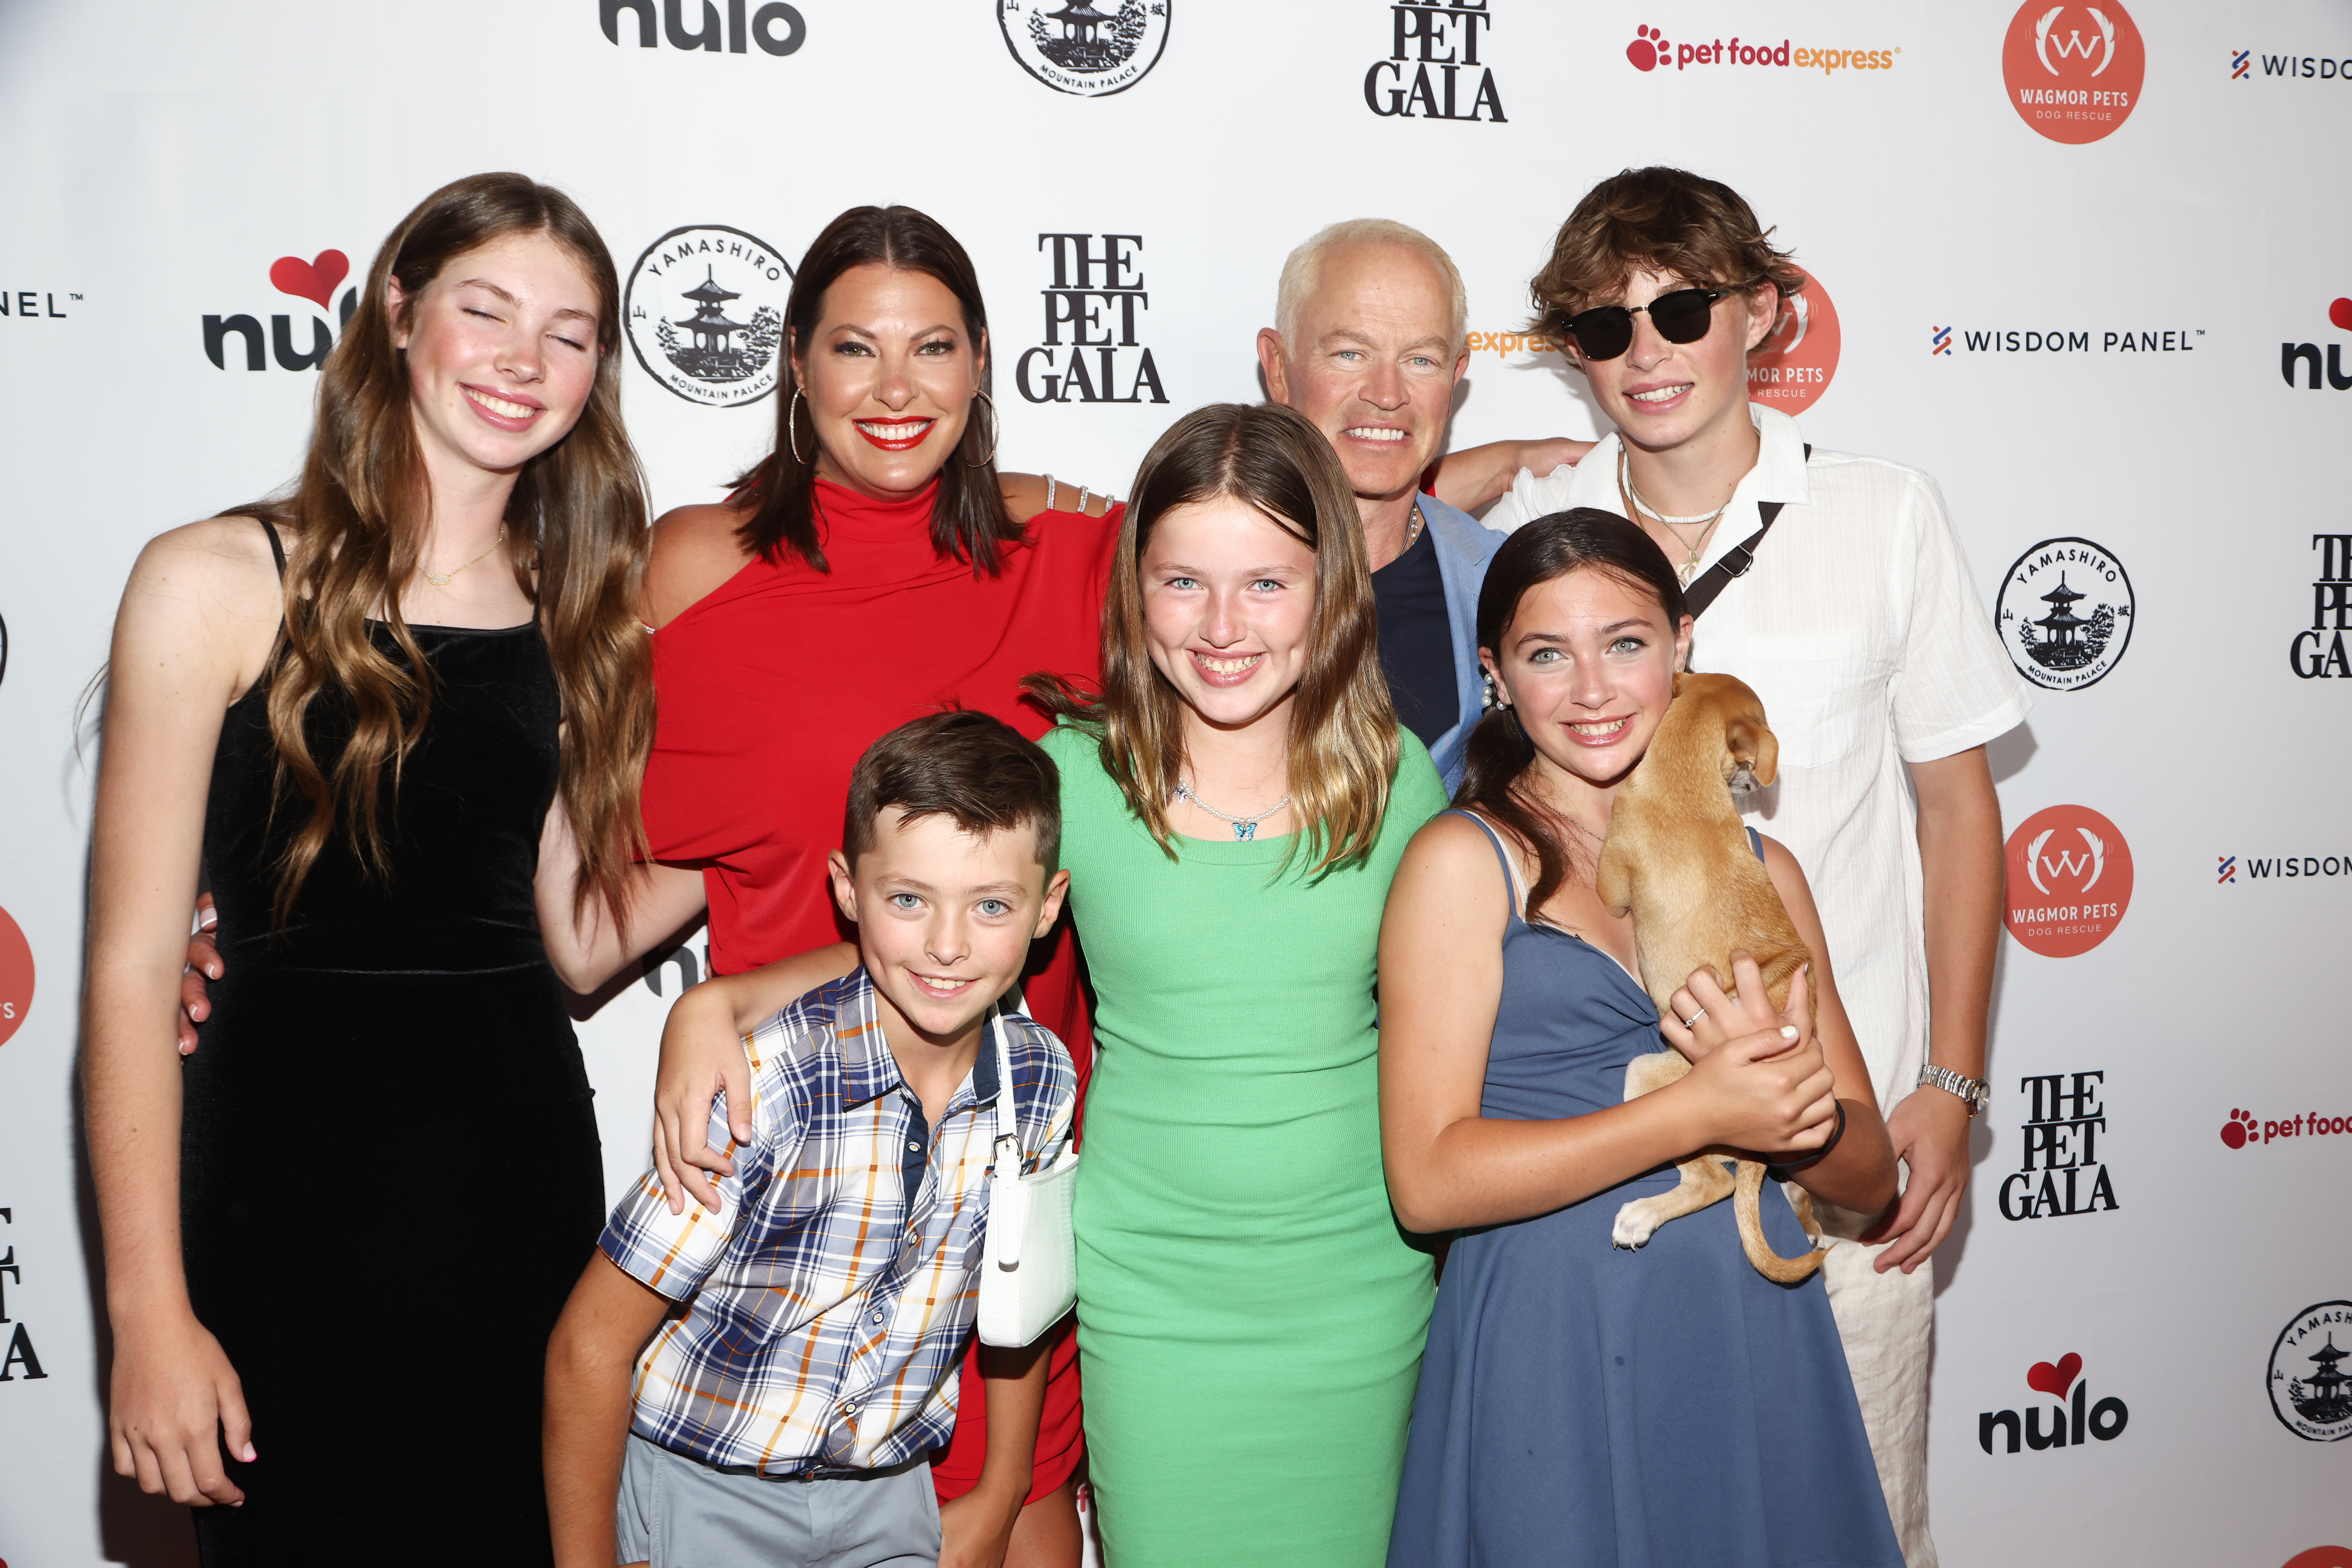 Ruve McDonough (2nd from L), Neal McDonough (C) and family at the Wagmor Pets Inaugural Pet Gala at Yamashiro Hollywood on June 27, 2022 in Los Angeles, California. | Source: Getty Images